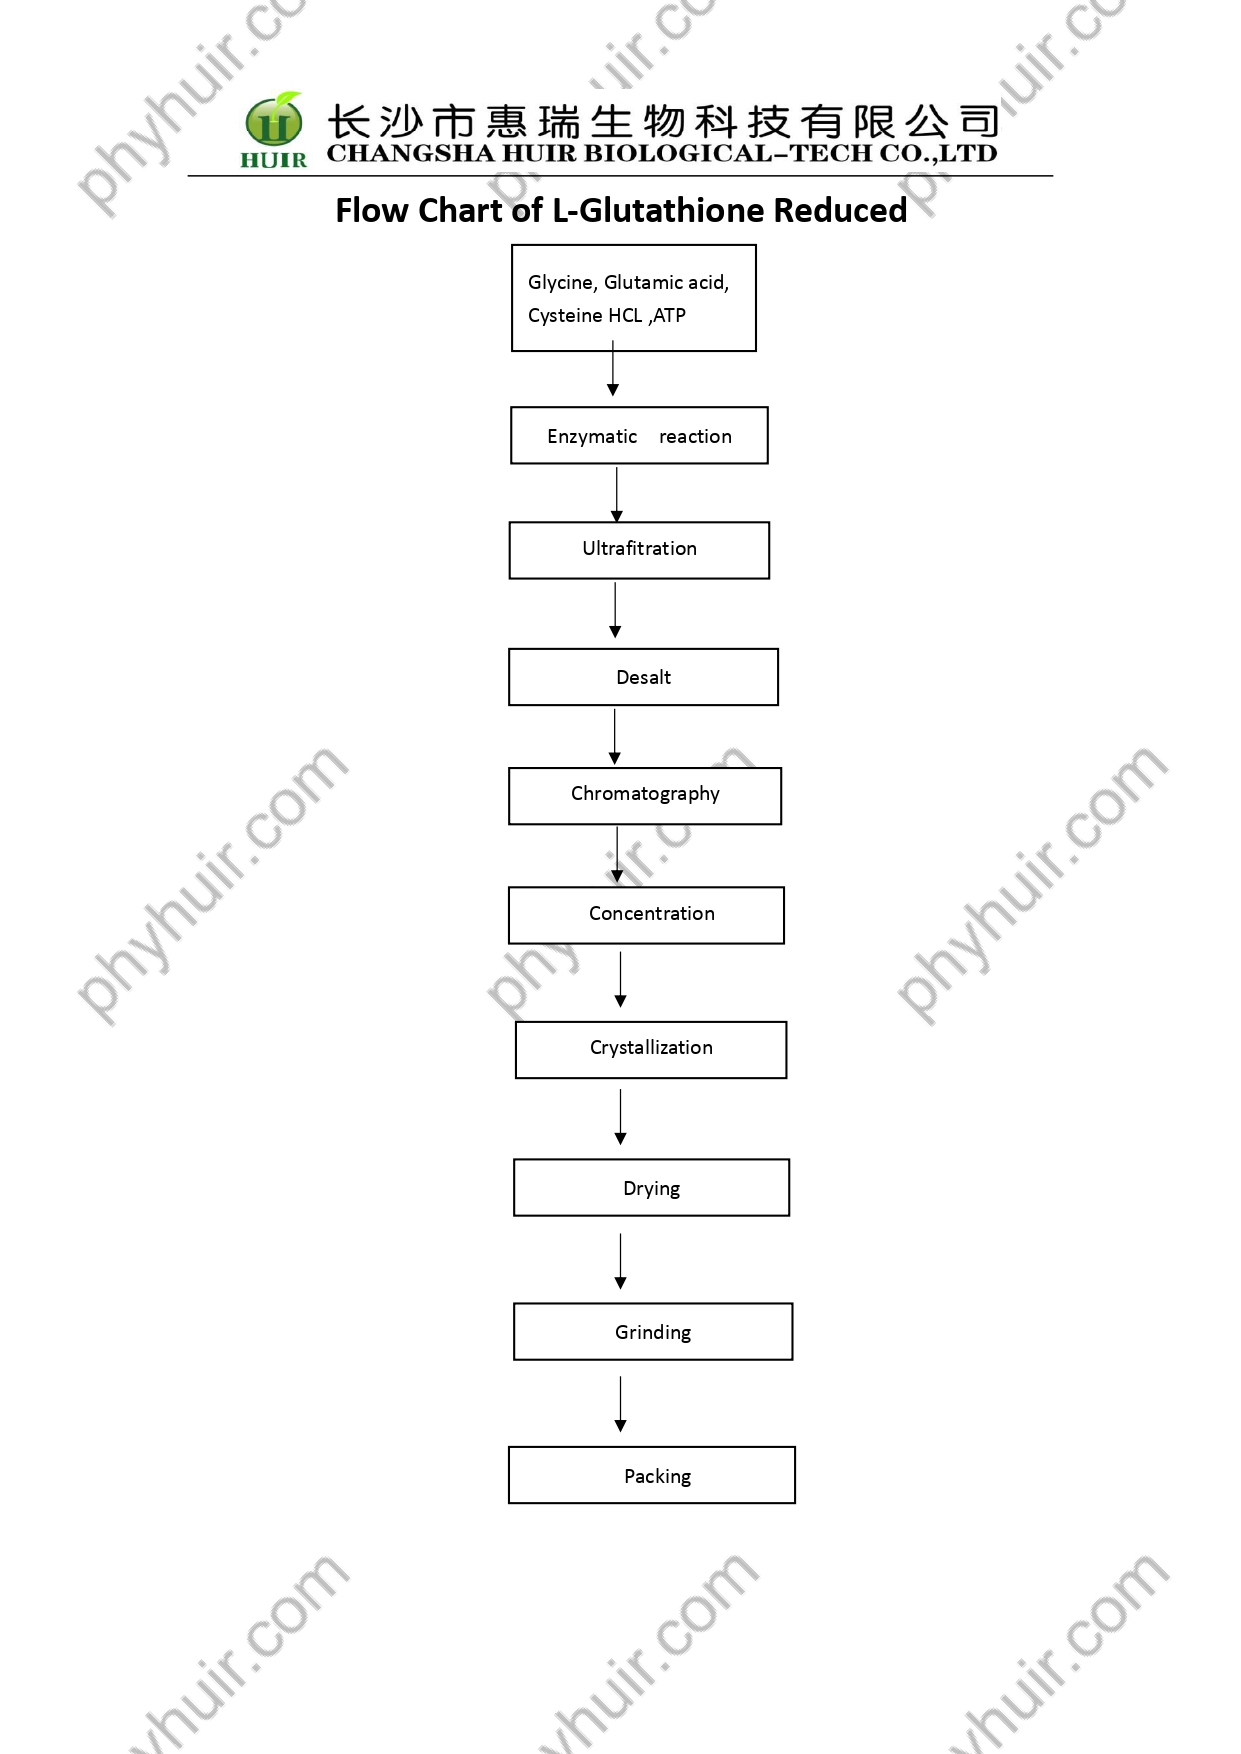 Flow Chart of L-Glutathione Reduced_watermark (1)_page-0001.jpg